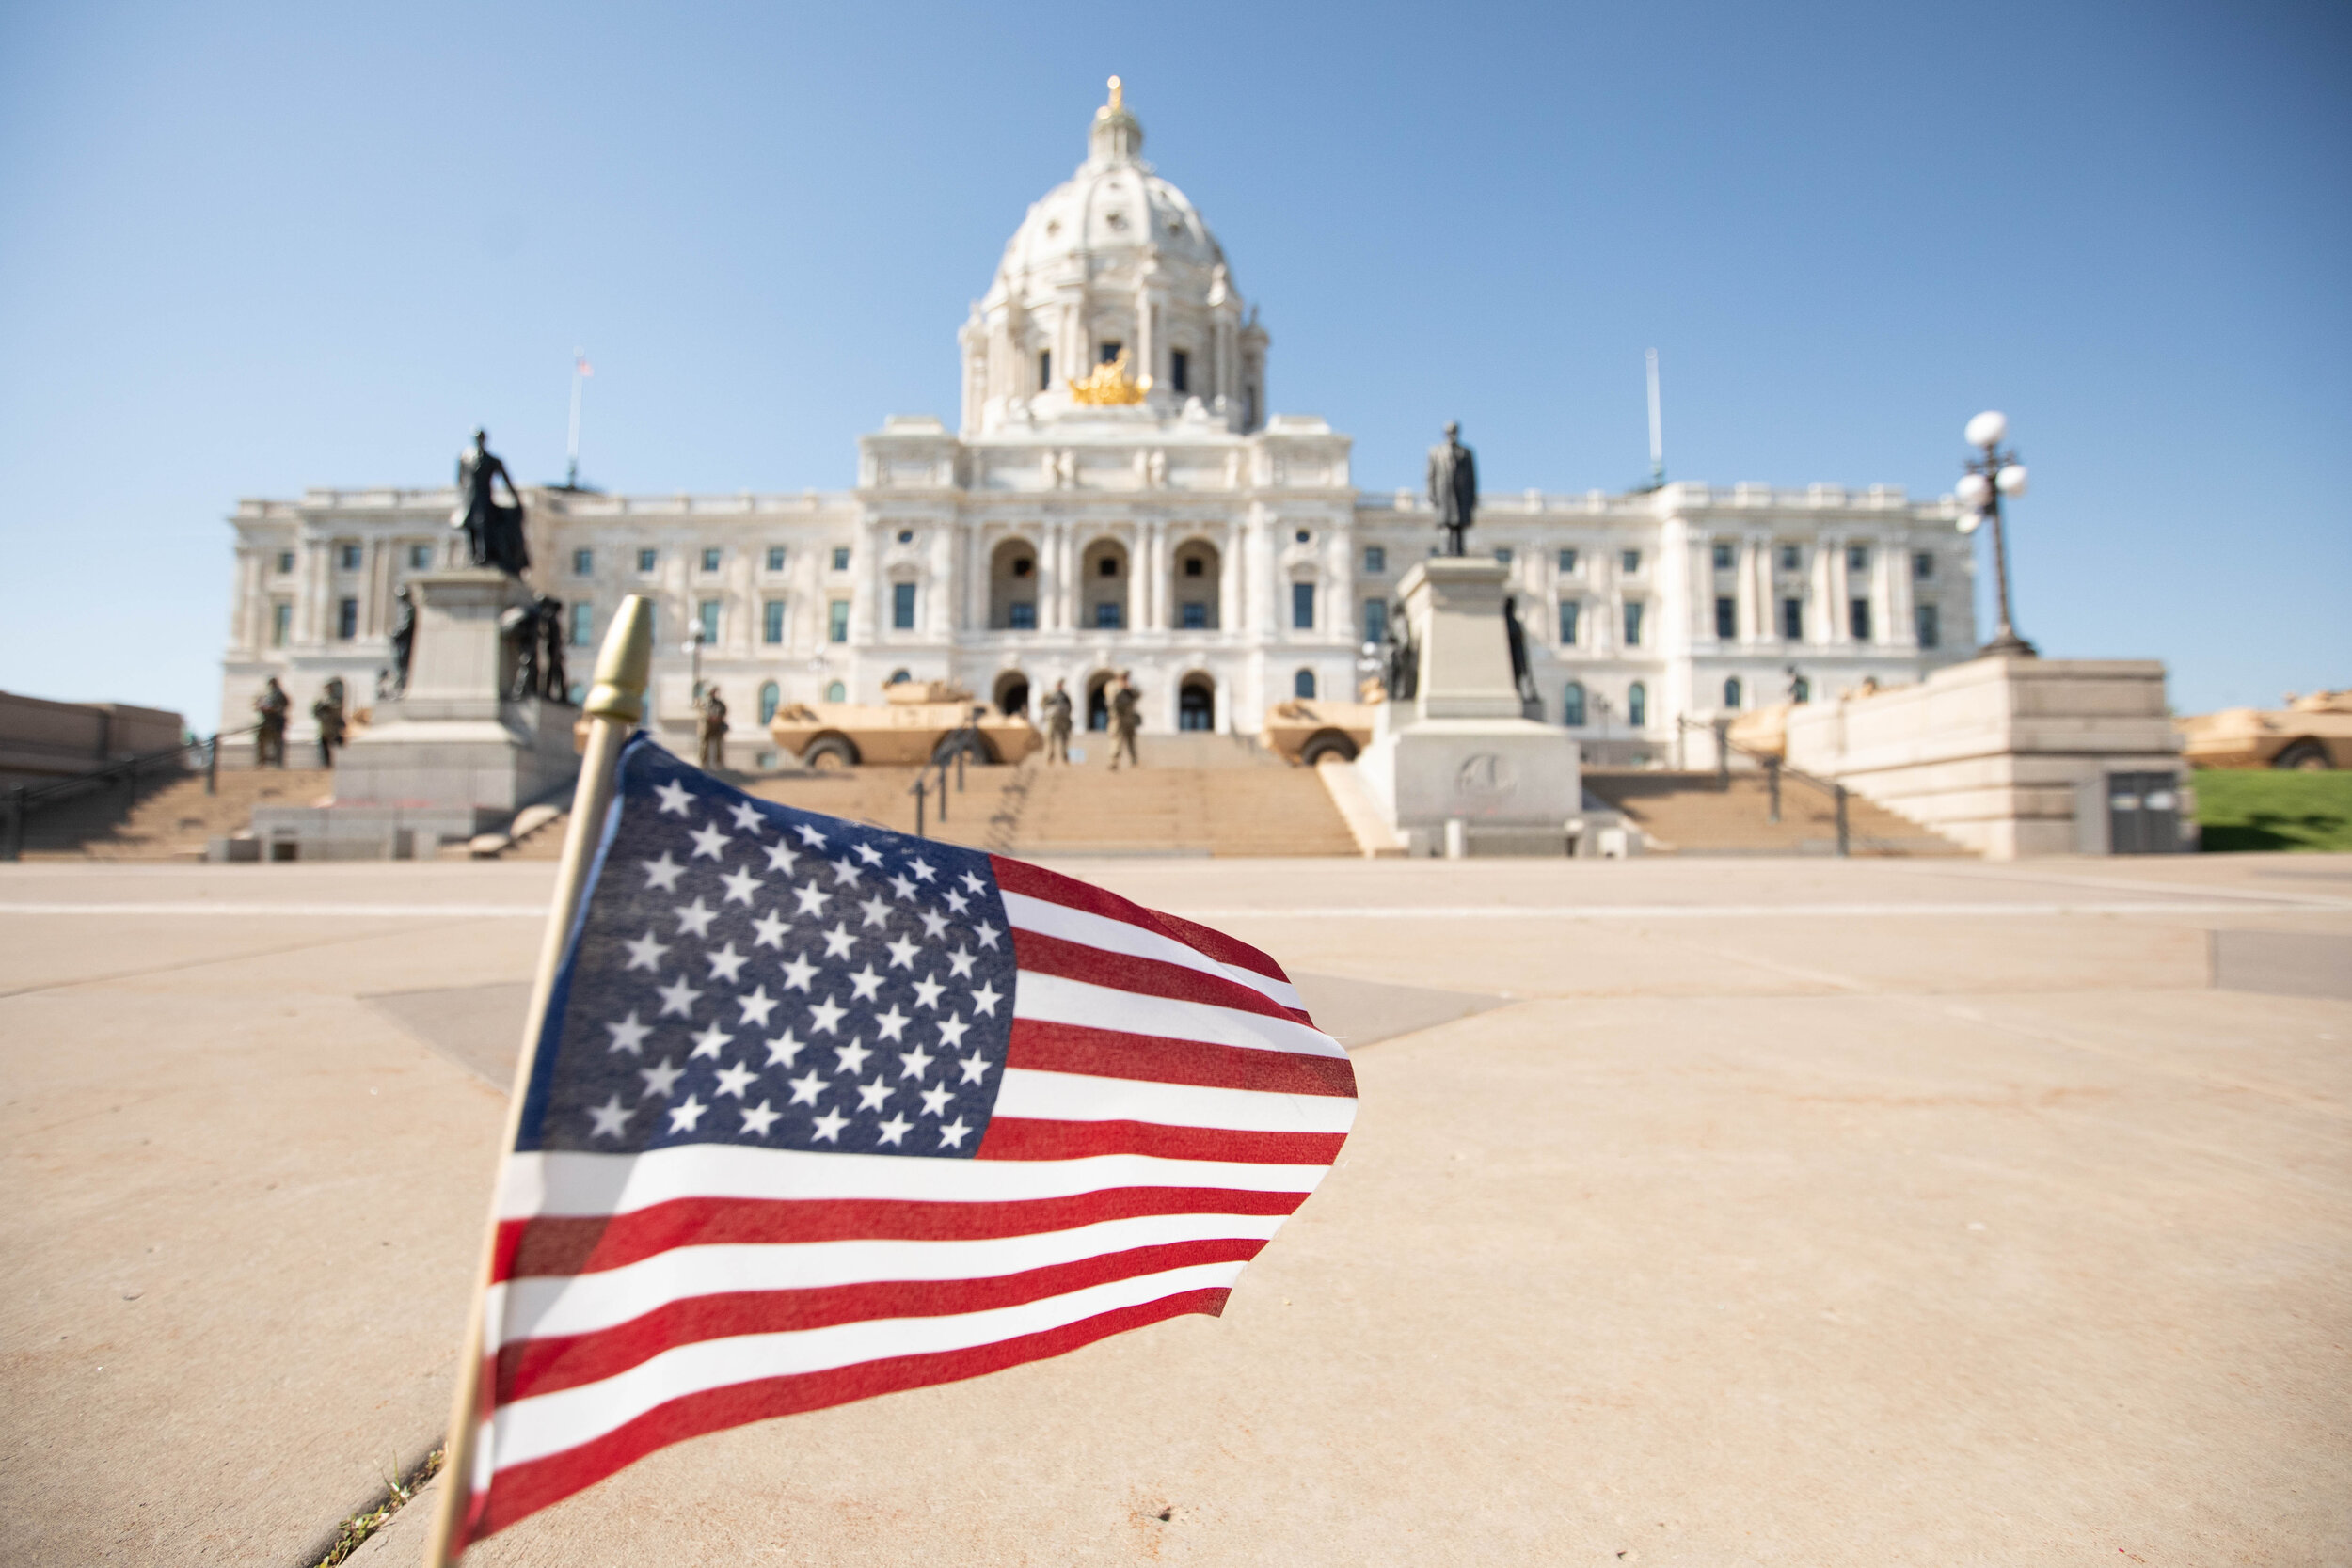  An American flag waves at the end of the lawn of the State Capitol building in Saint Paul, Minnesota as the National Guard secure the steps with armored vehicles and armed soldiers on June 1, 2020. Chris Juhn/Zenger 